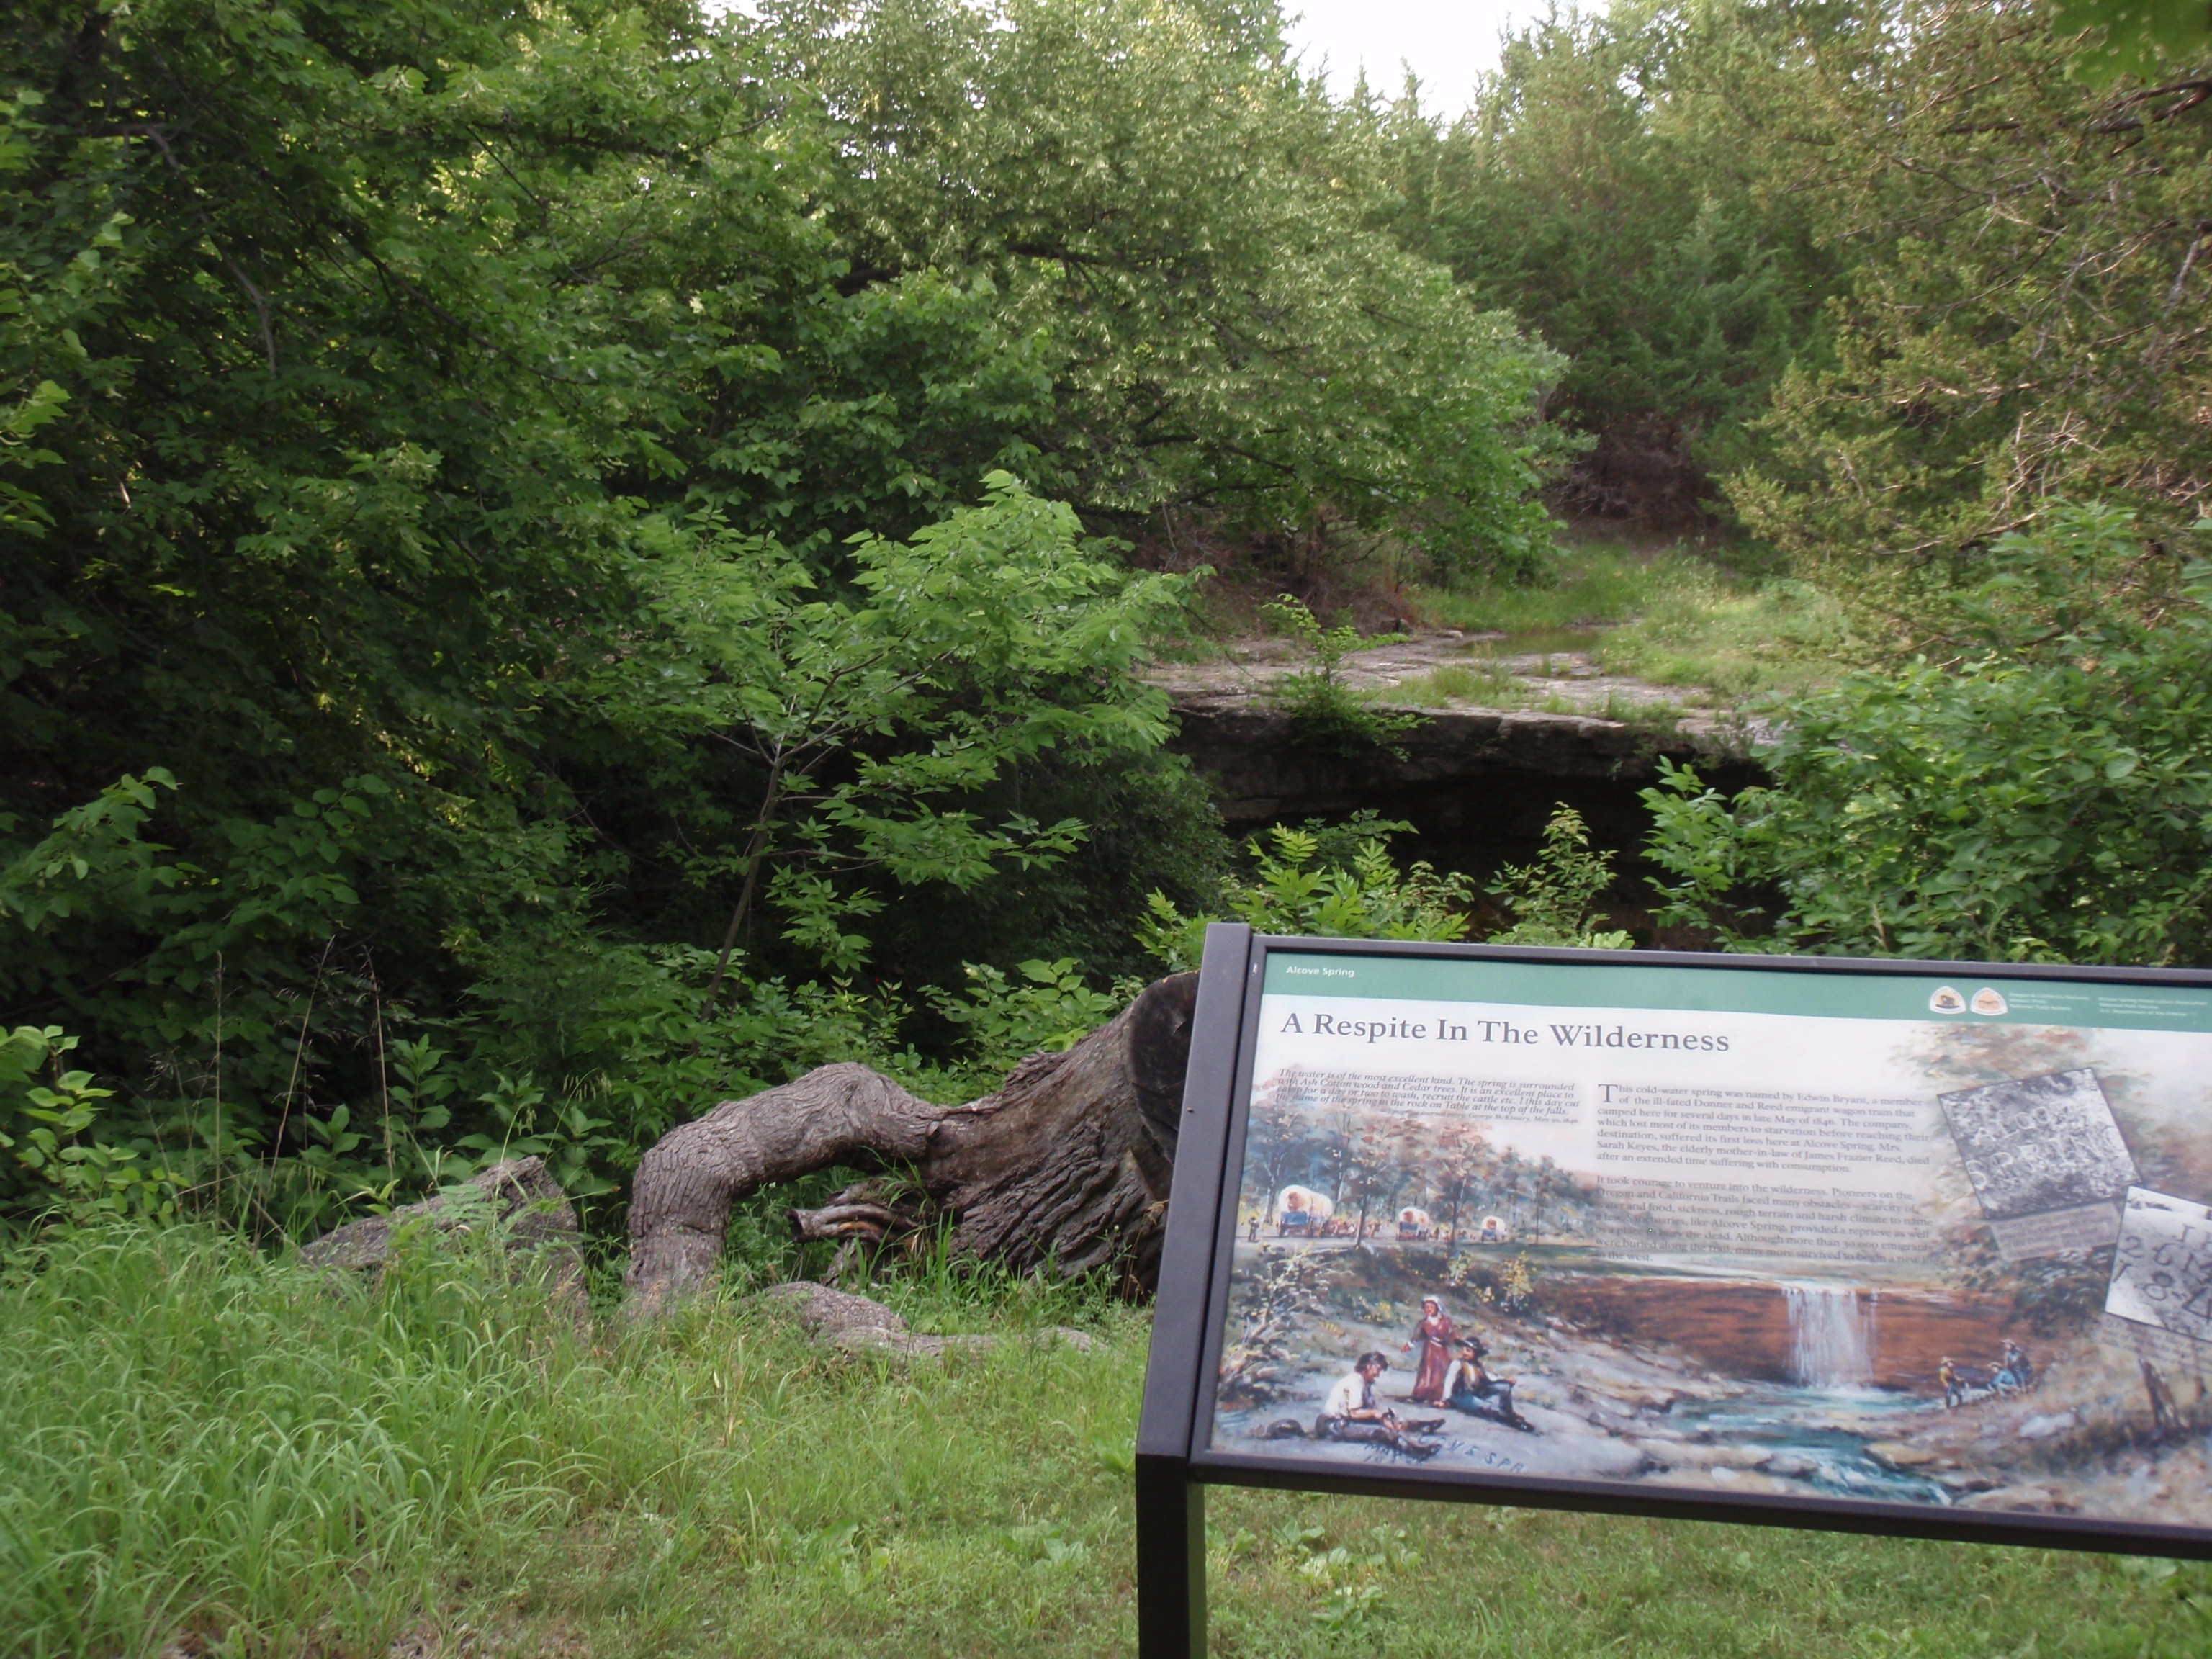 An exhibit with an illustration in front of green trees and a rock ledge.